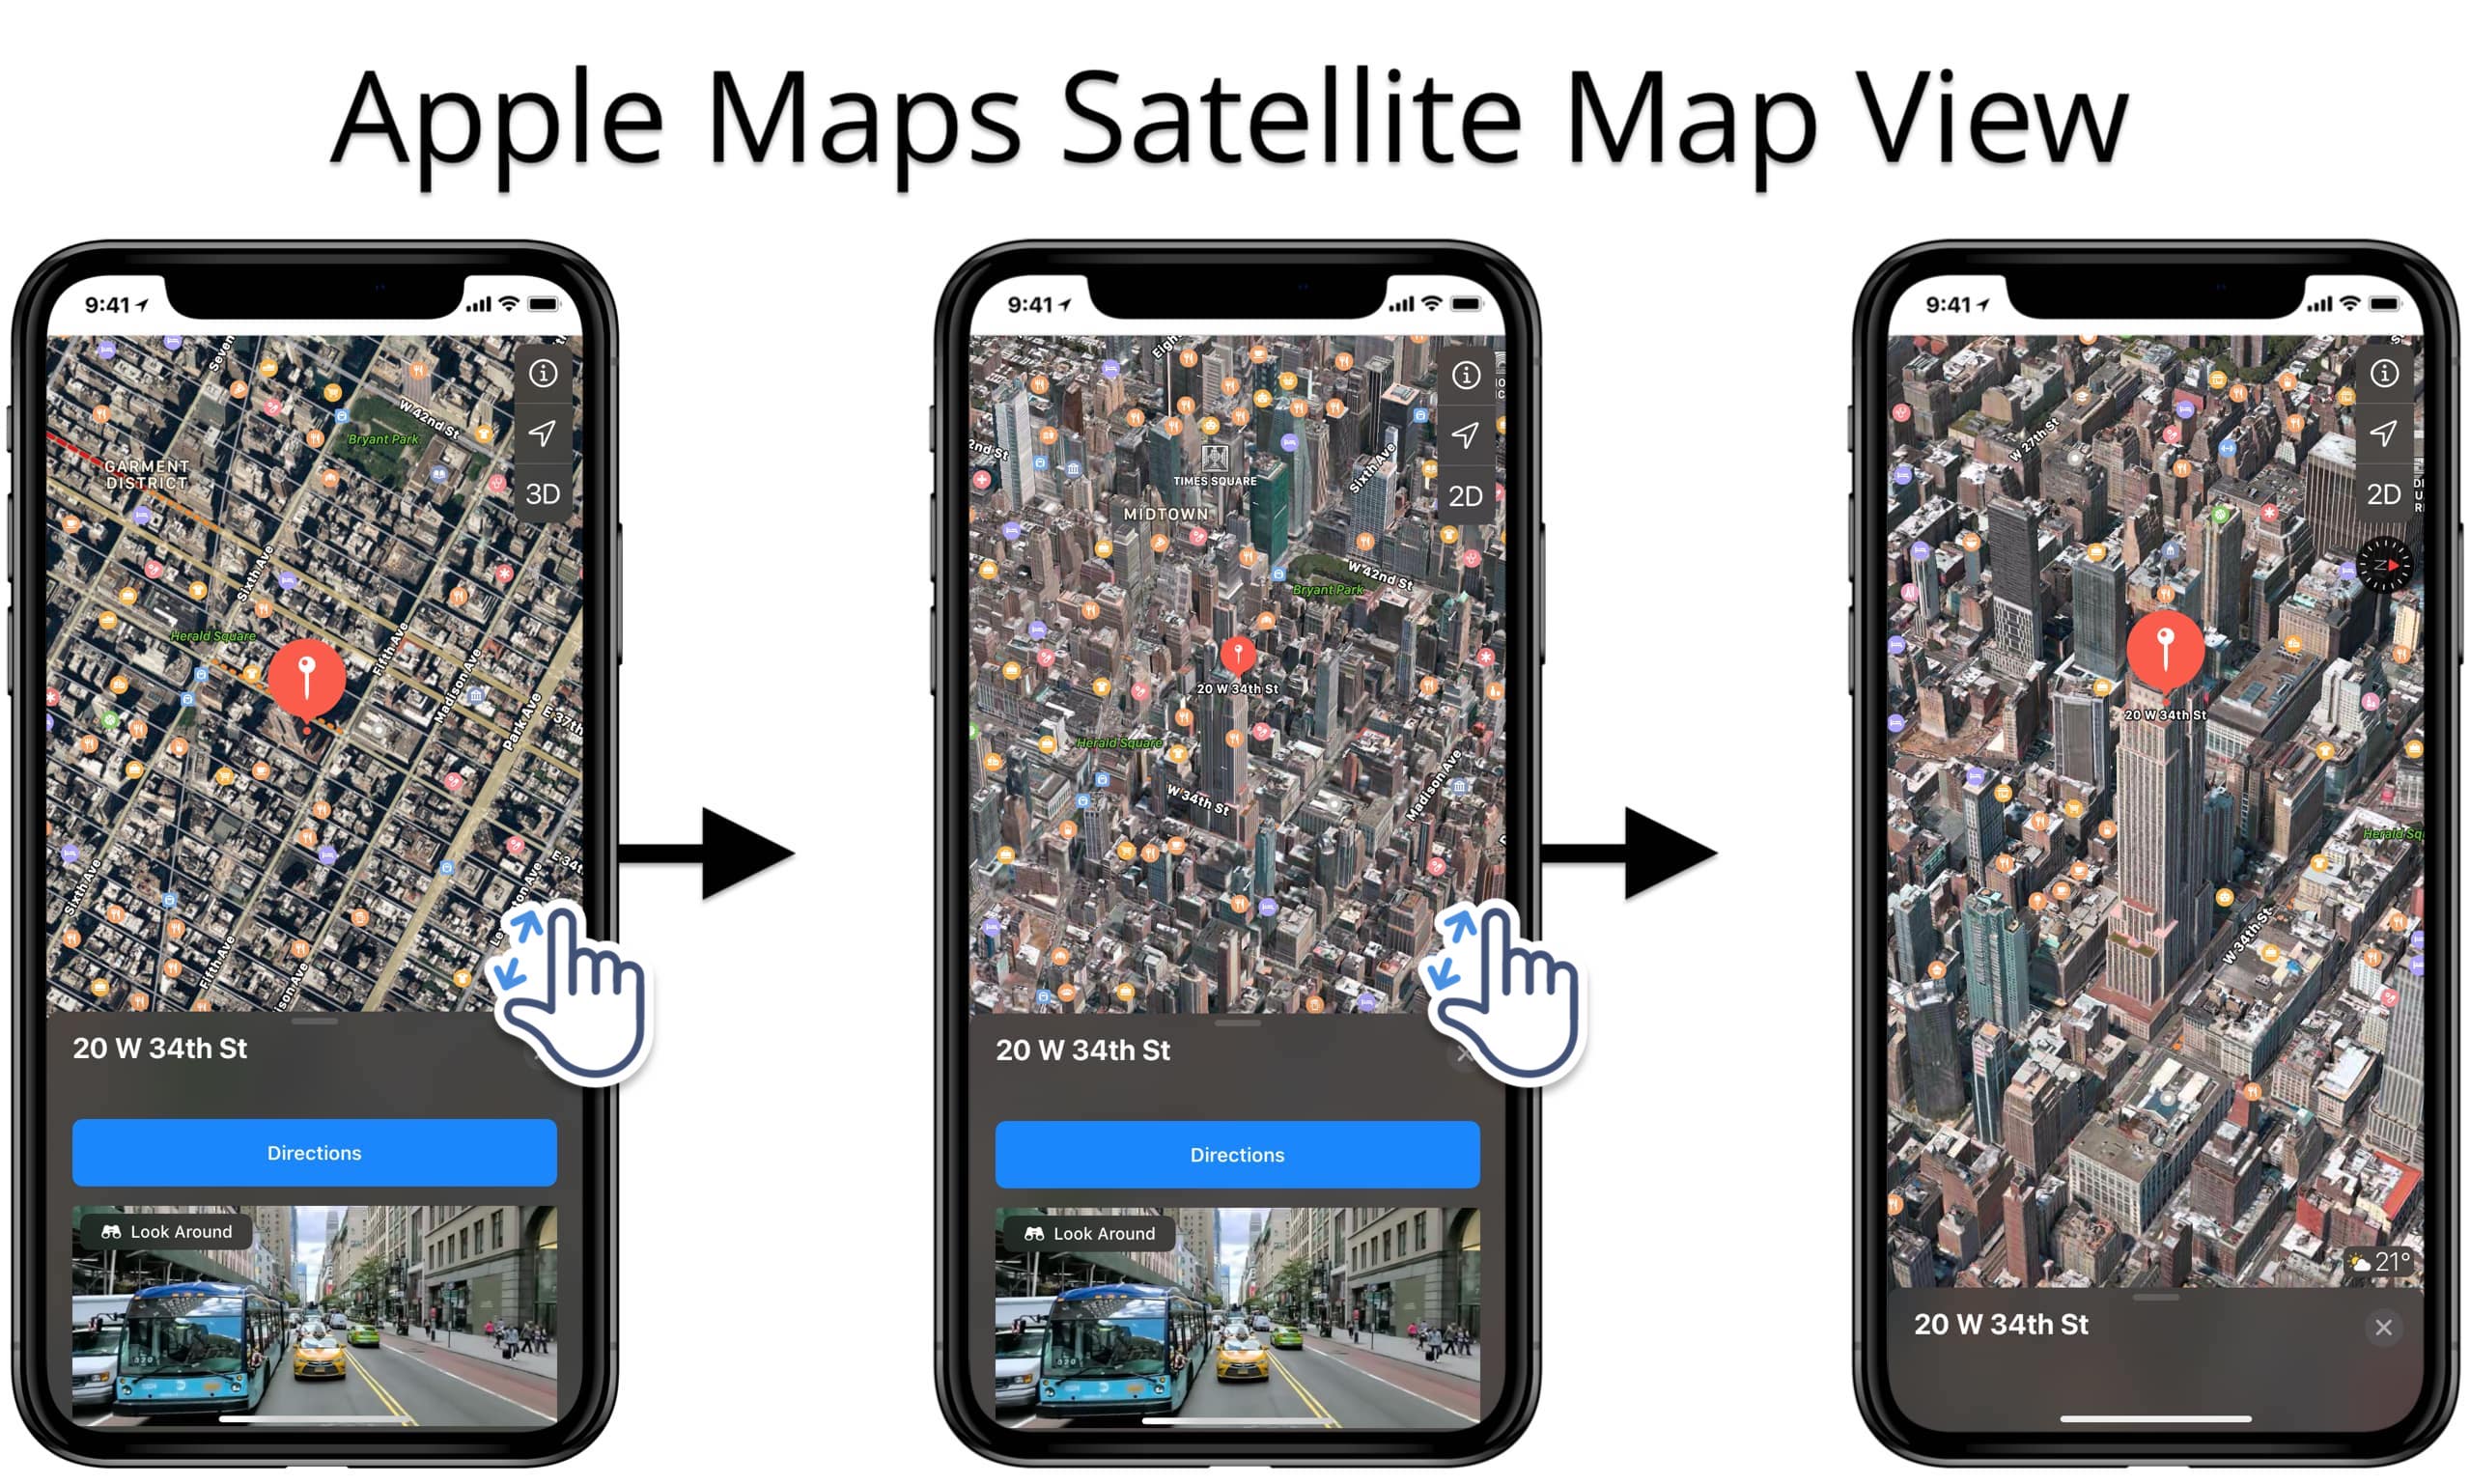 Use Apple Maps satellite map view to see 3D building models of route destinations.